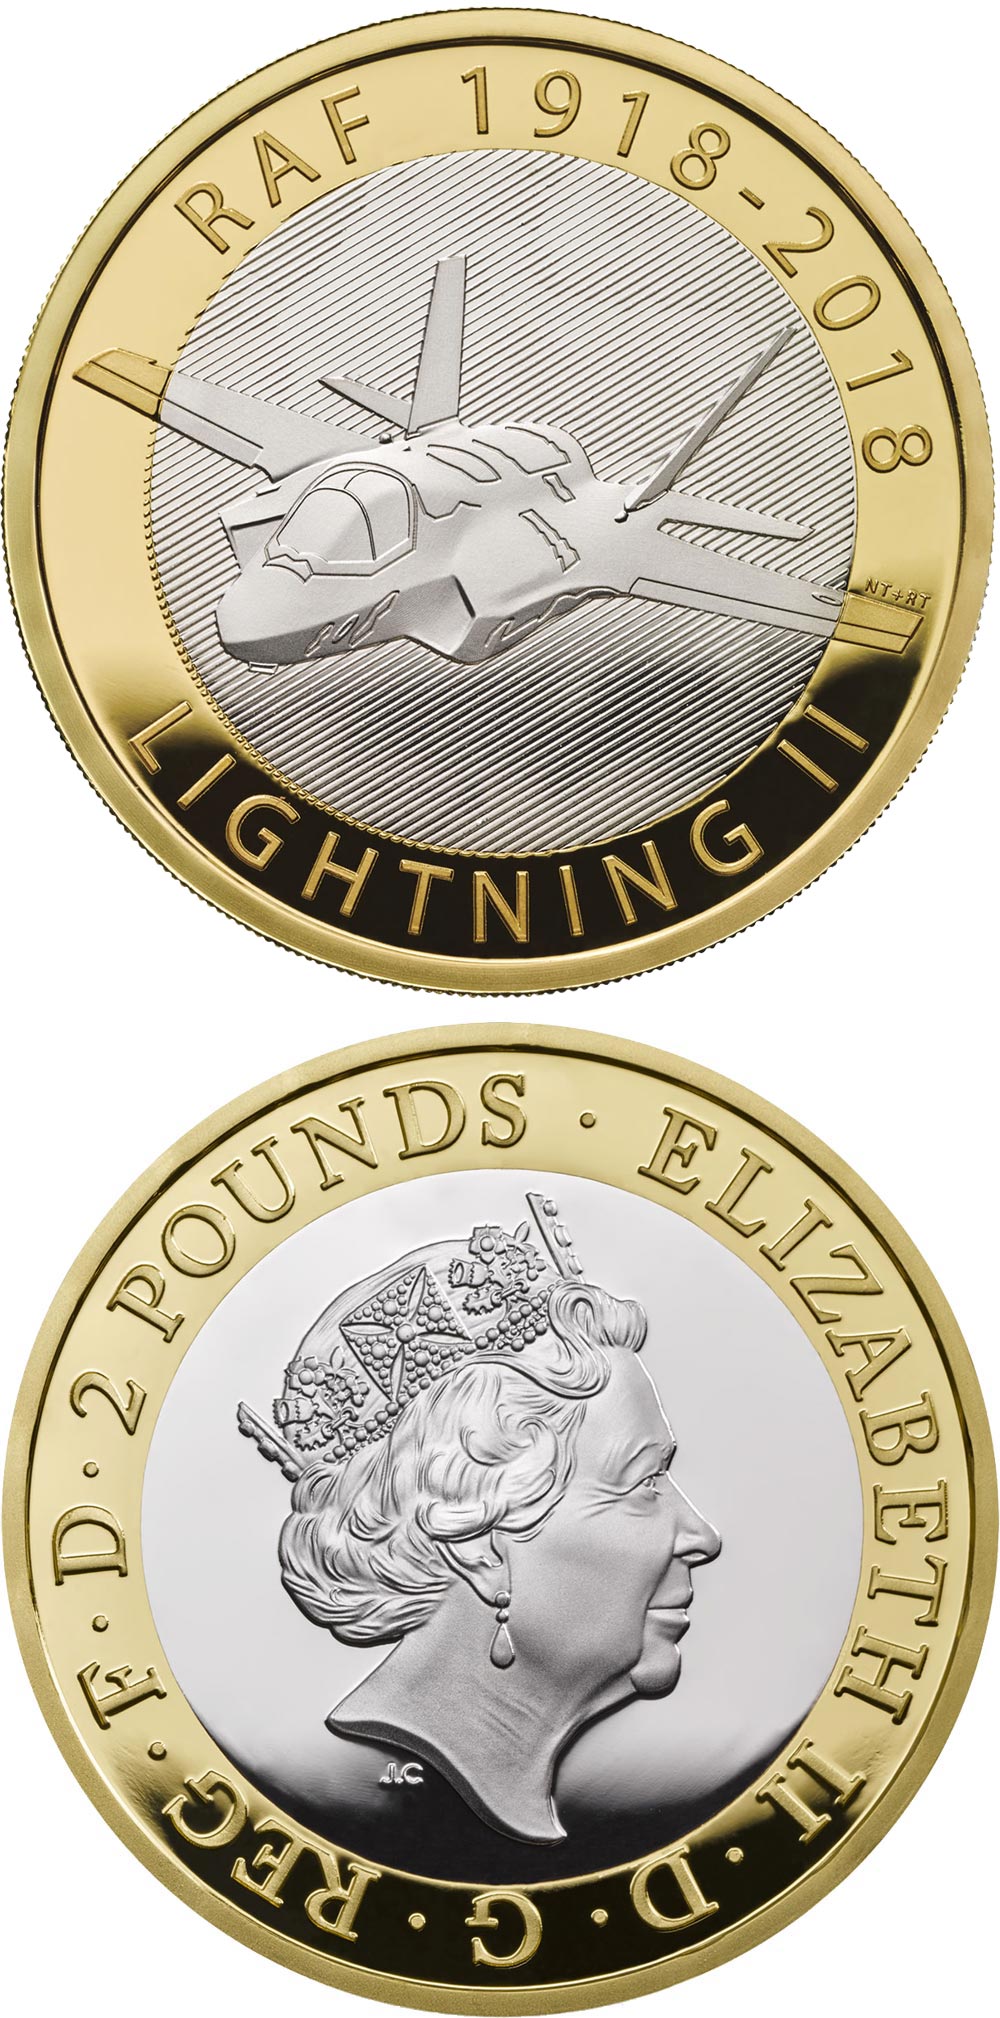 Image of 2 pounds coin - RAF Centenary Lightning II | United Kingdom 2018.  The Bimetal: CuNi, nordic gold coin is of Proof, BU quality.